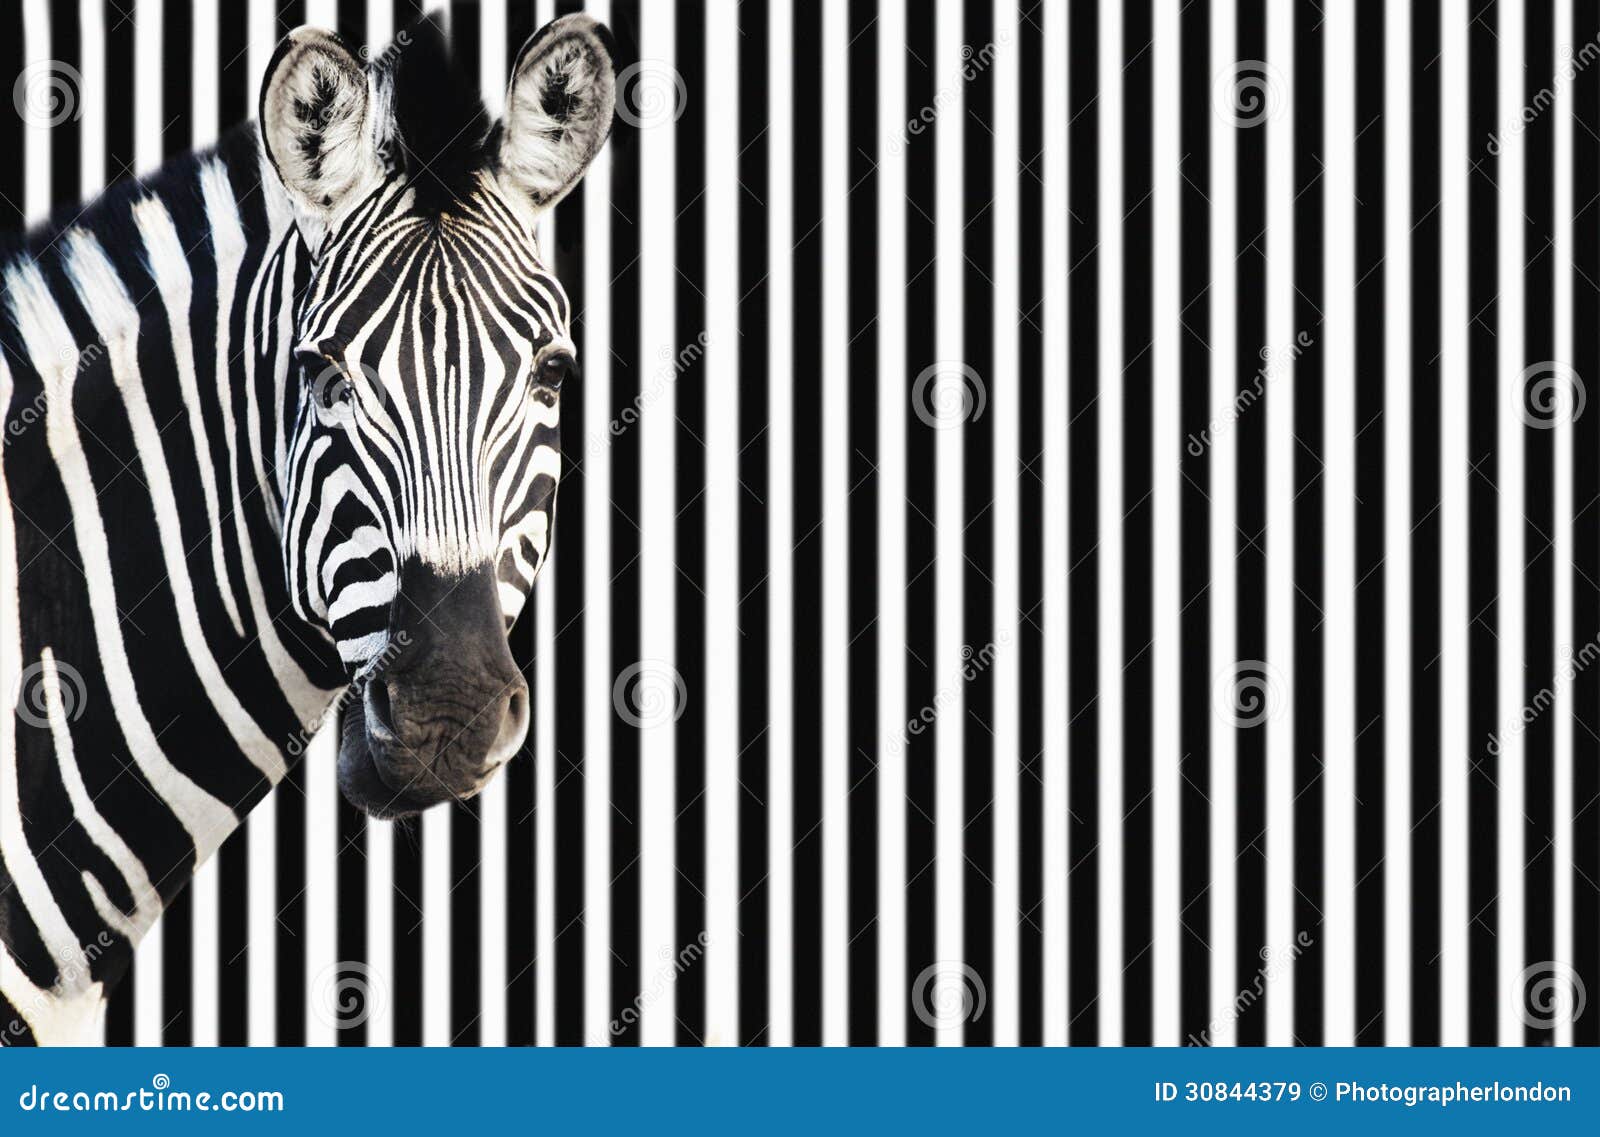 zebra on striped background looking at camera